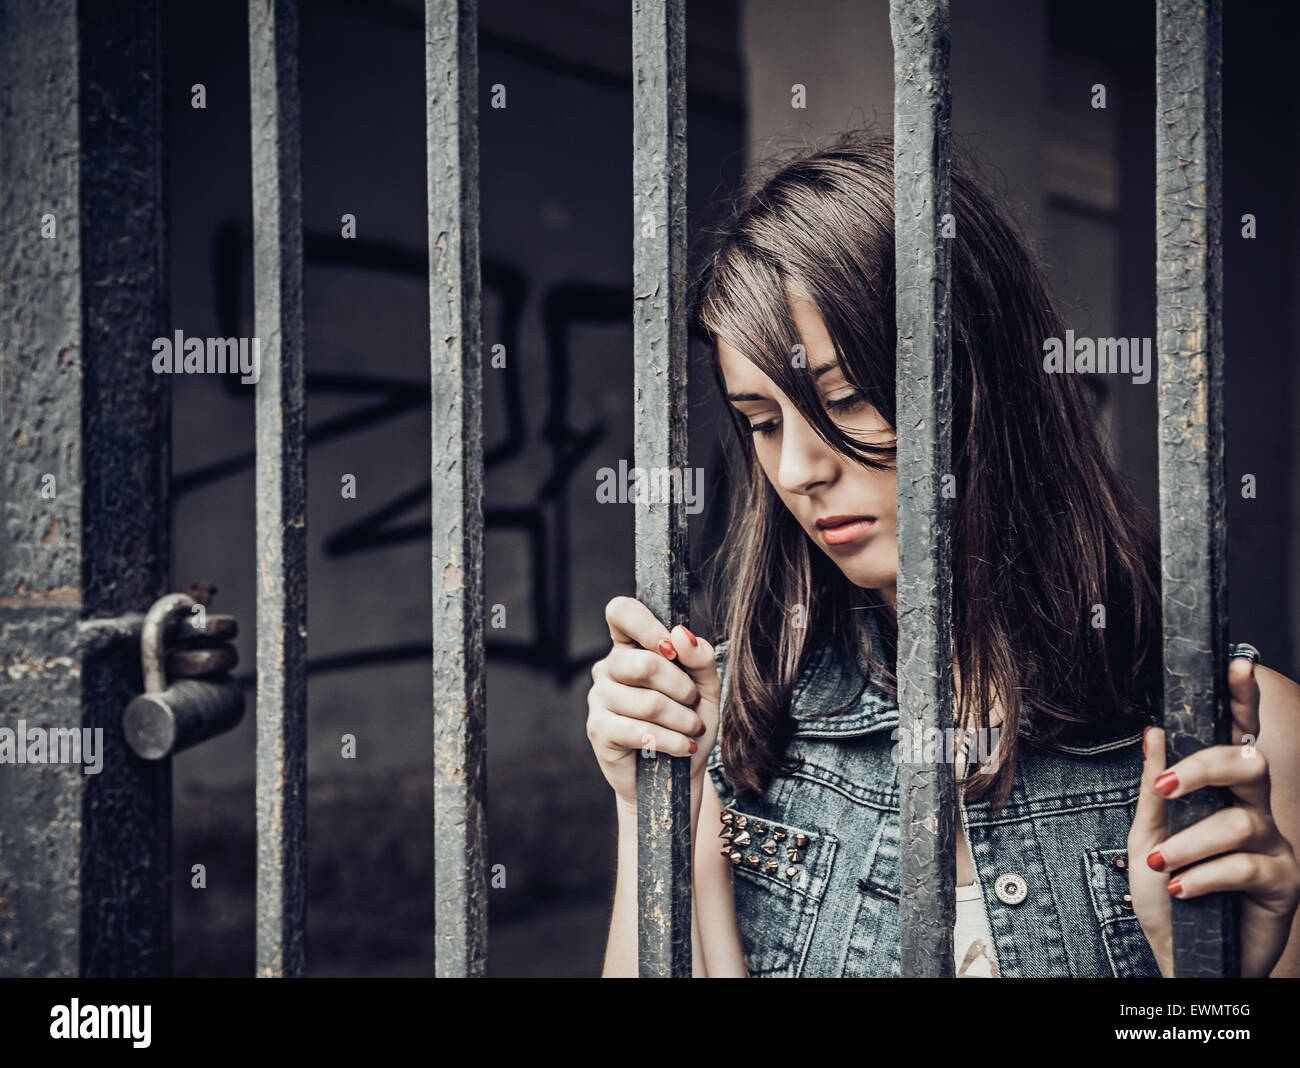 Young woman who is imprisoned Stock Photo